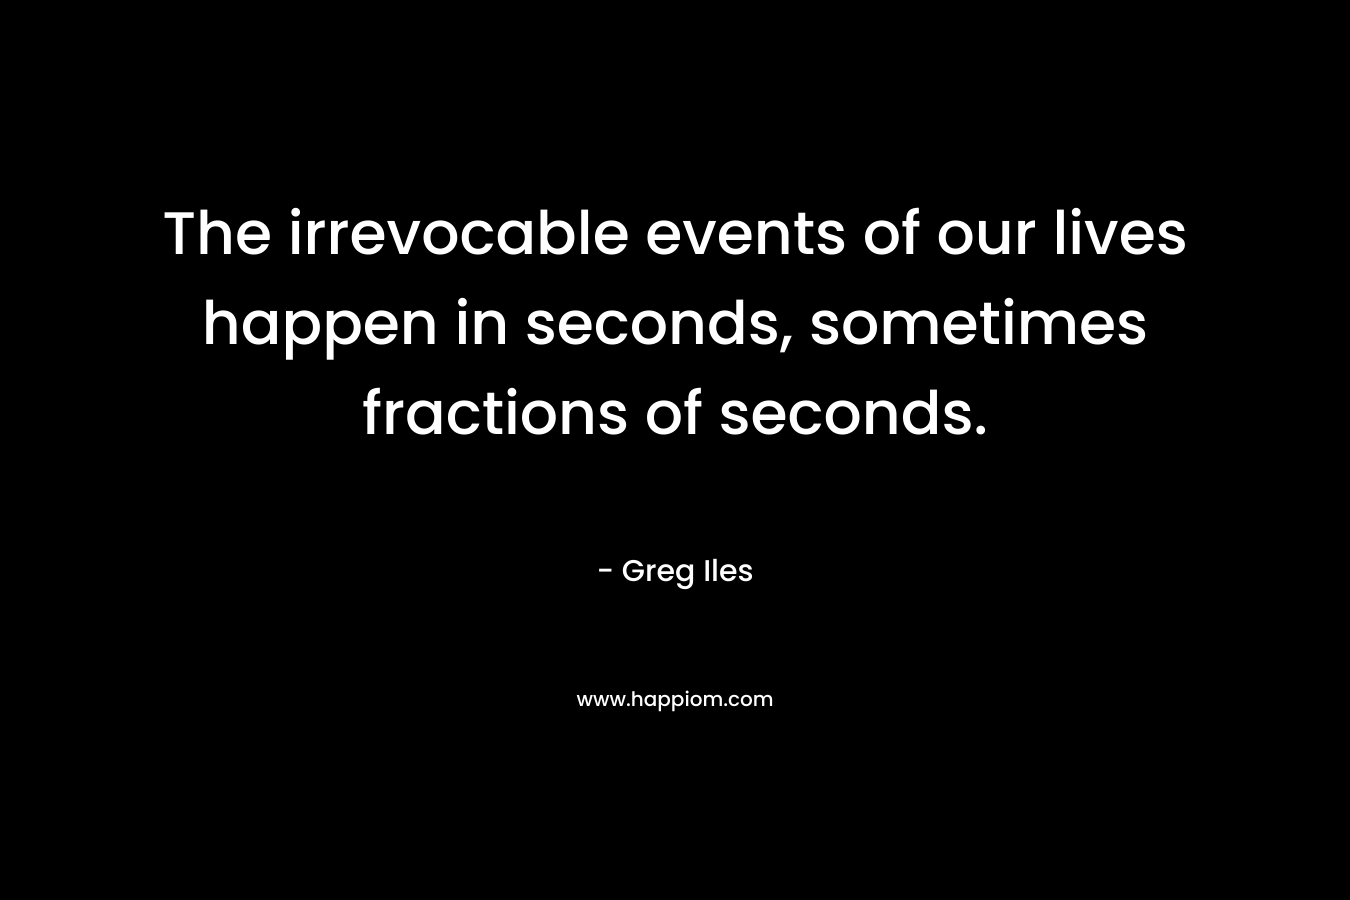 The irrevocable events of our lives happen in seconds, sometimes fractions of seconds.